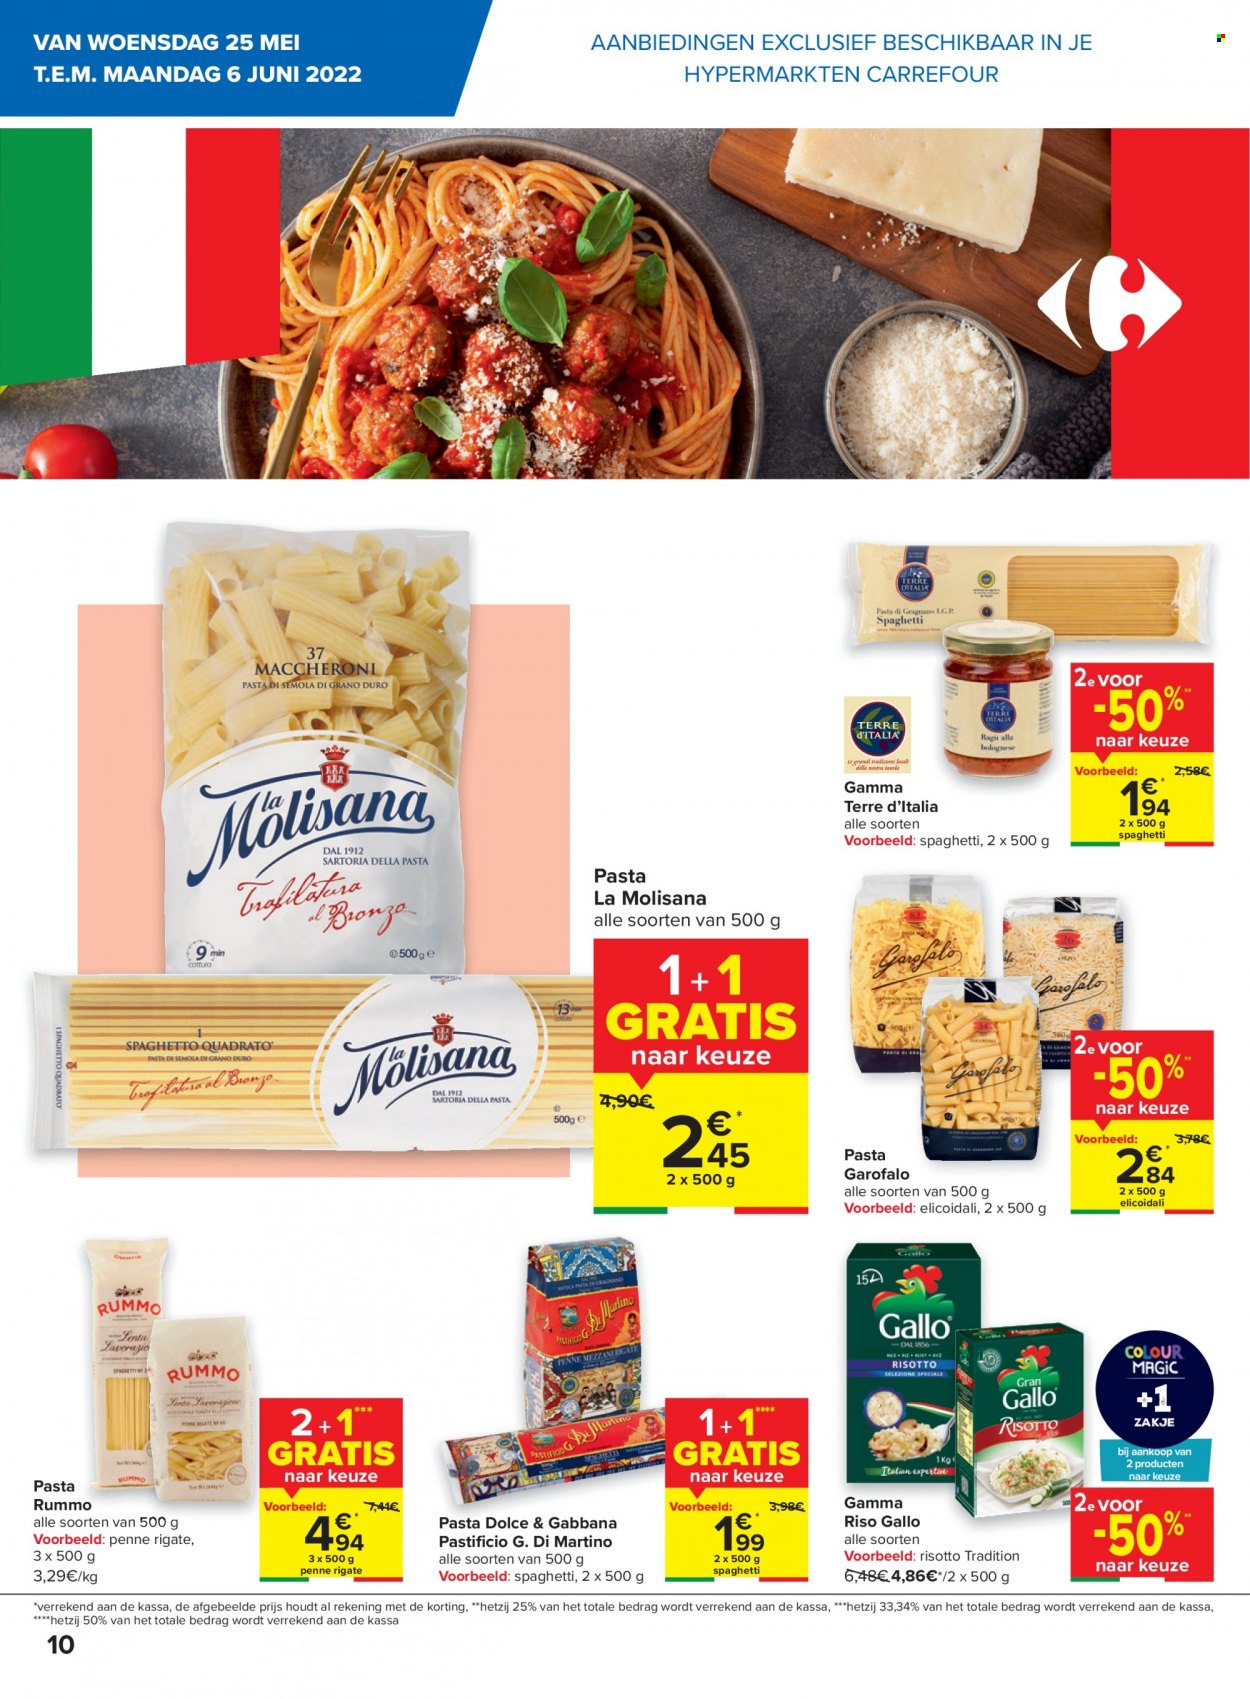 Catalogue Carrefour hypermarkt - 24.5.2022 - 30.5.2022. Page 10.